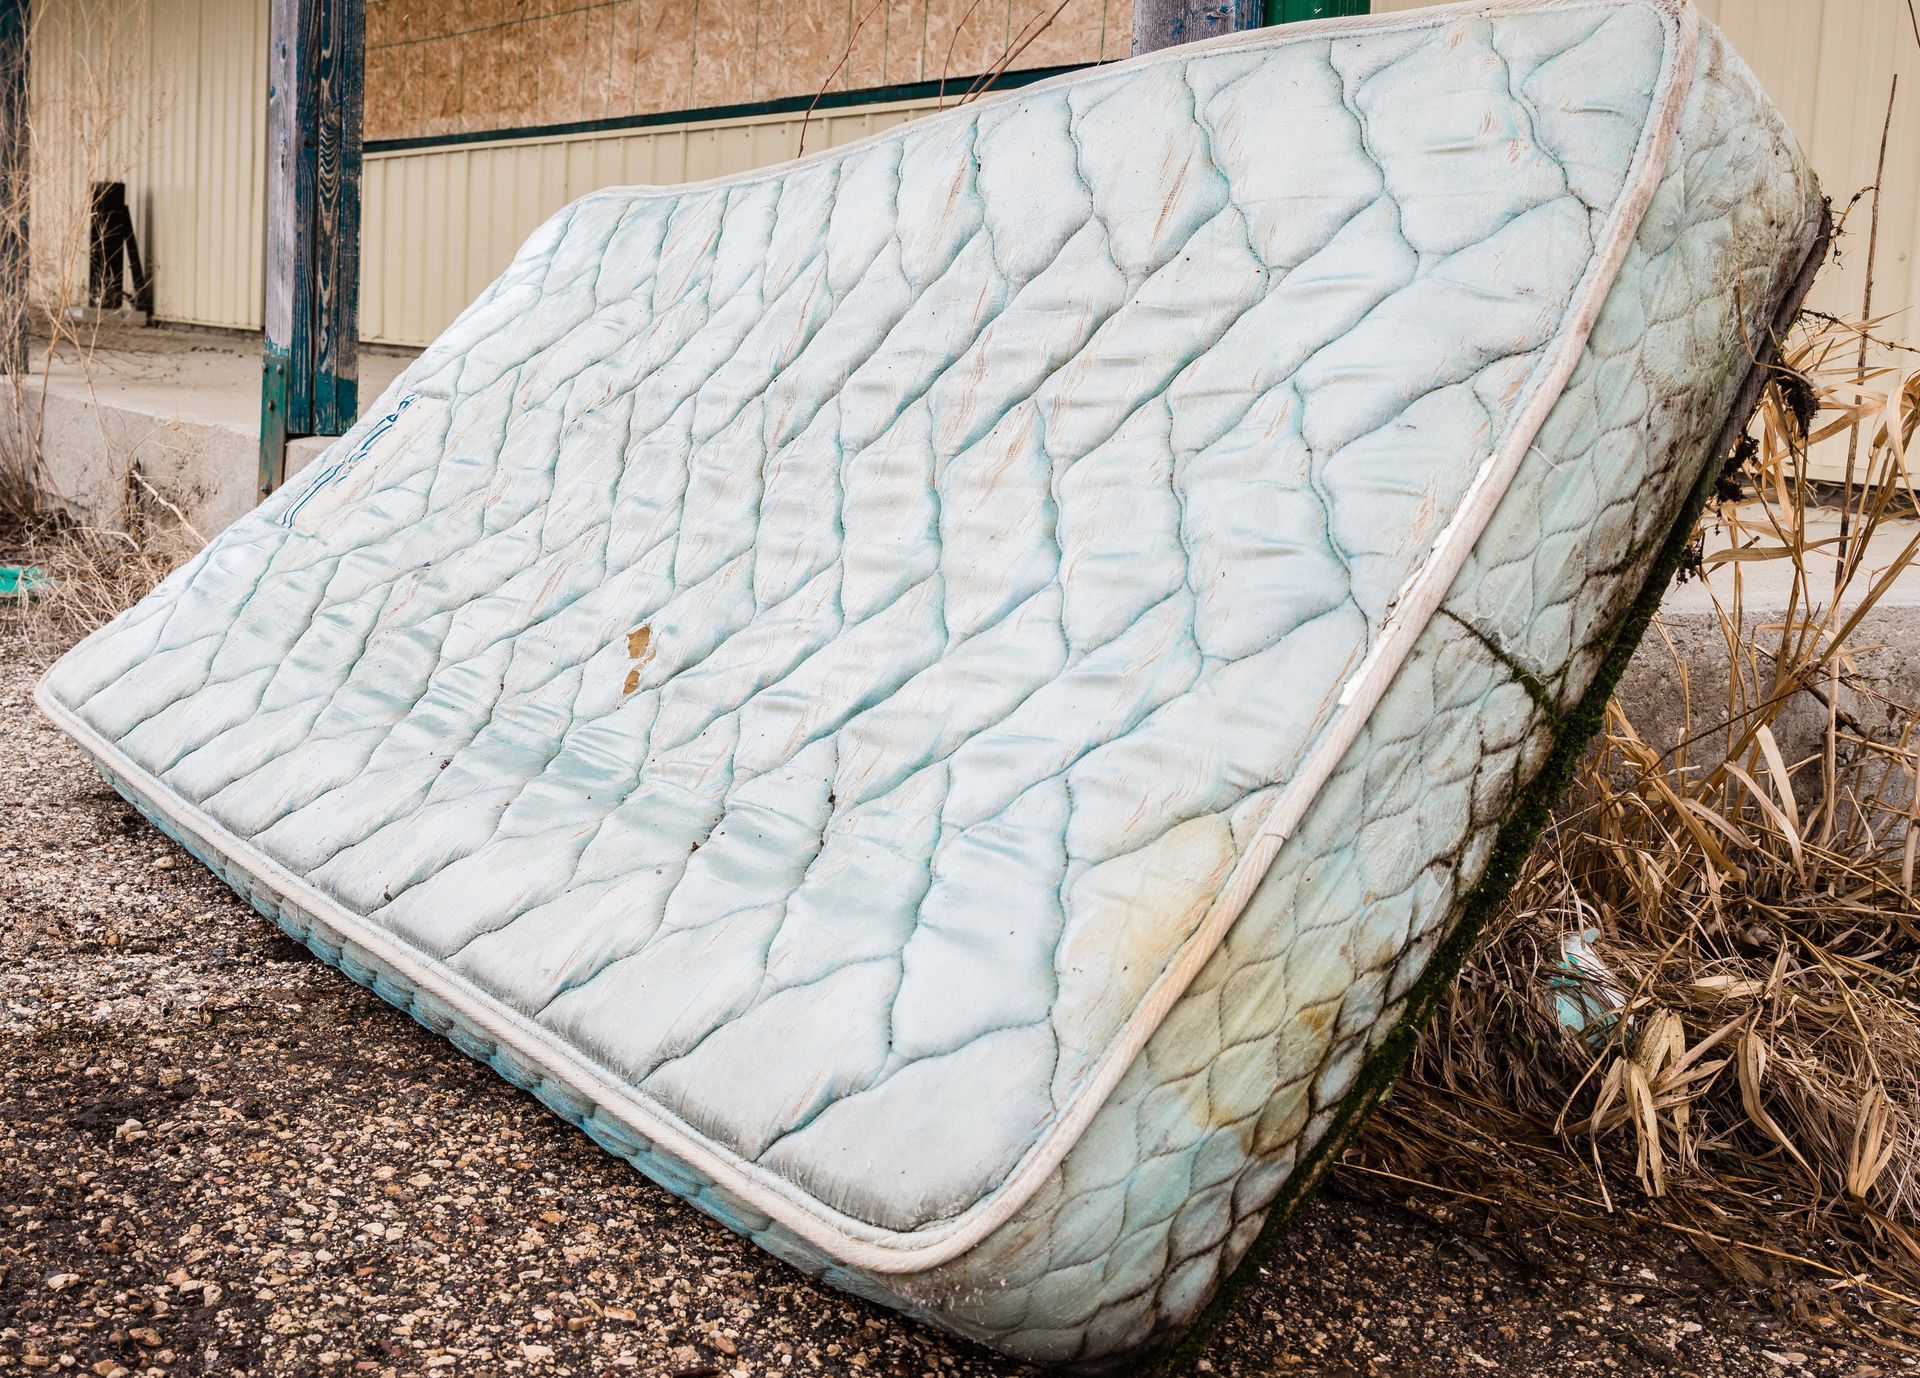 An old mattress is laying on the ground outside of a building.